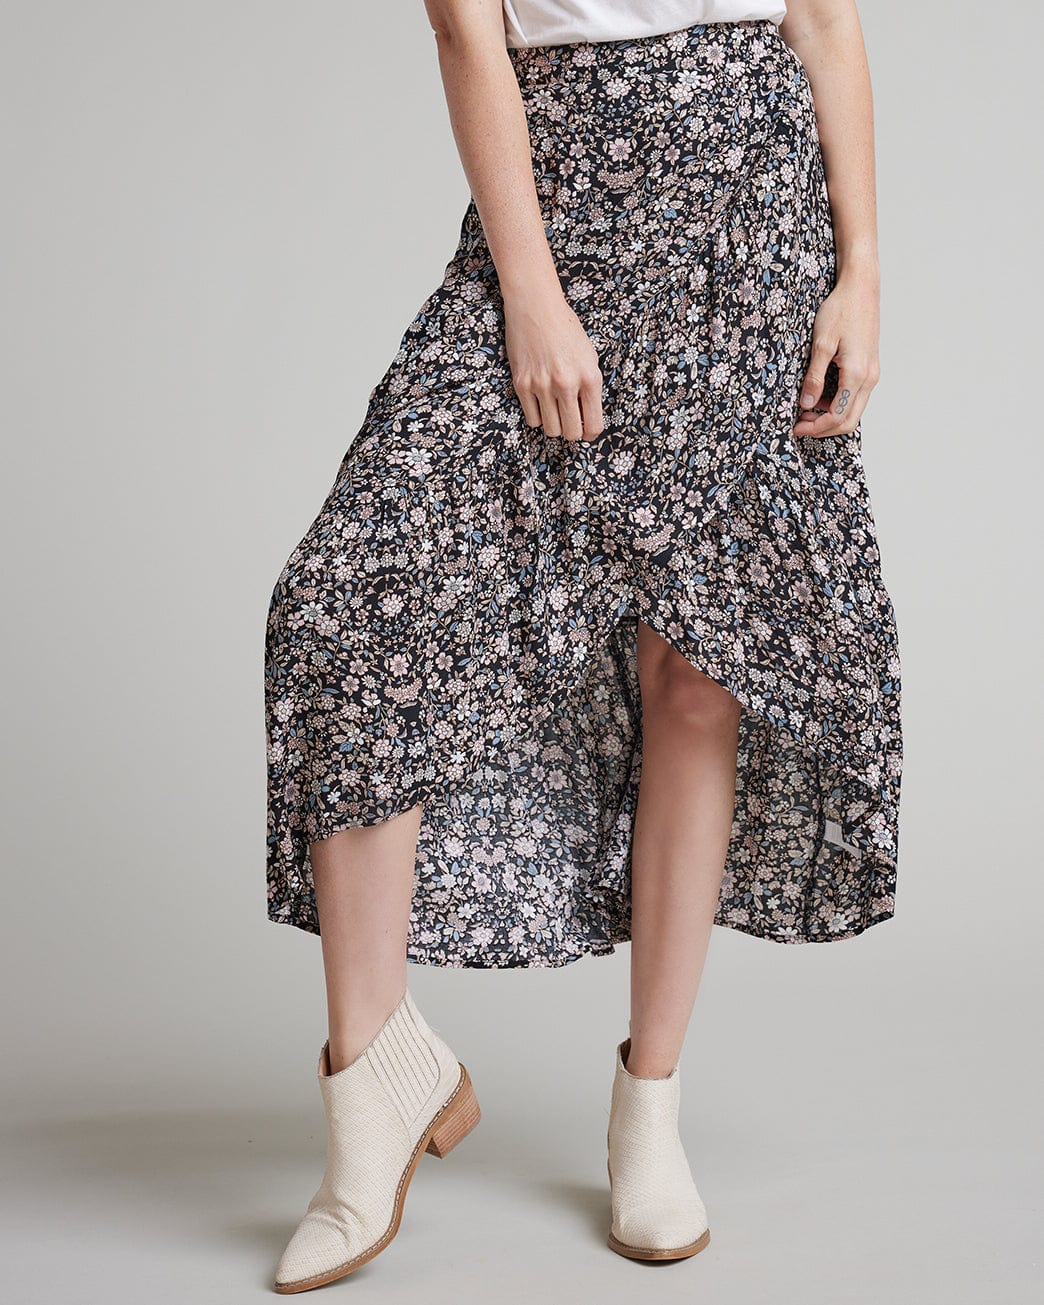 Woman in a floral printed wrap skirt